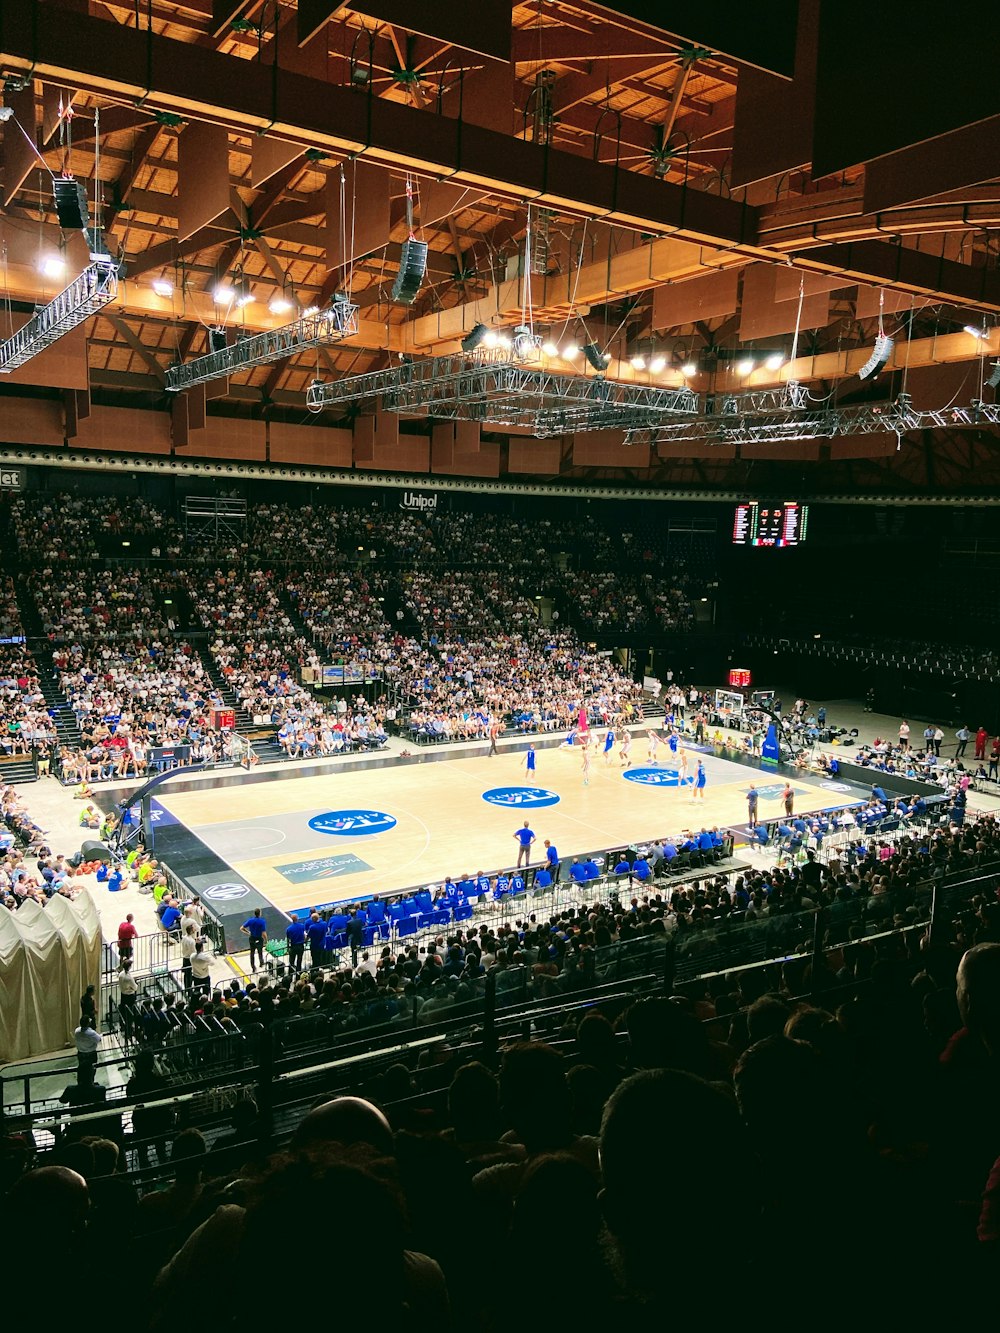 a basketball court in a stadium